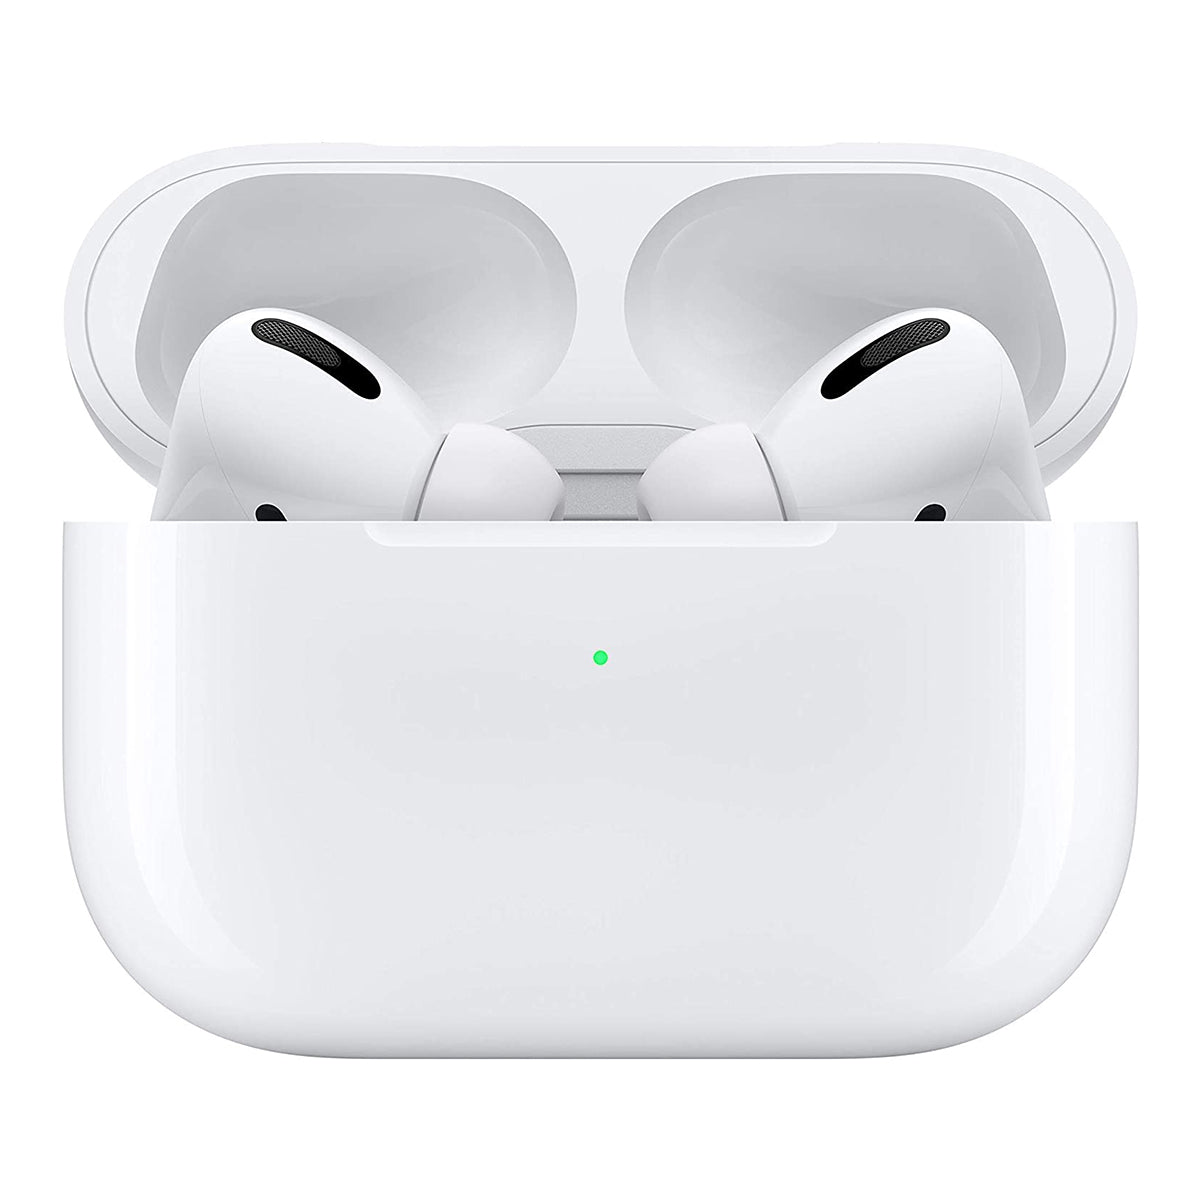 AirPods Pro ワイヤレス充電ケース付き｜AirPodsの中古は